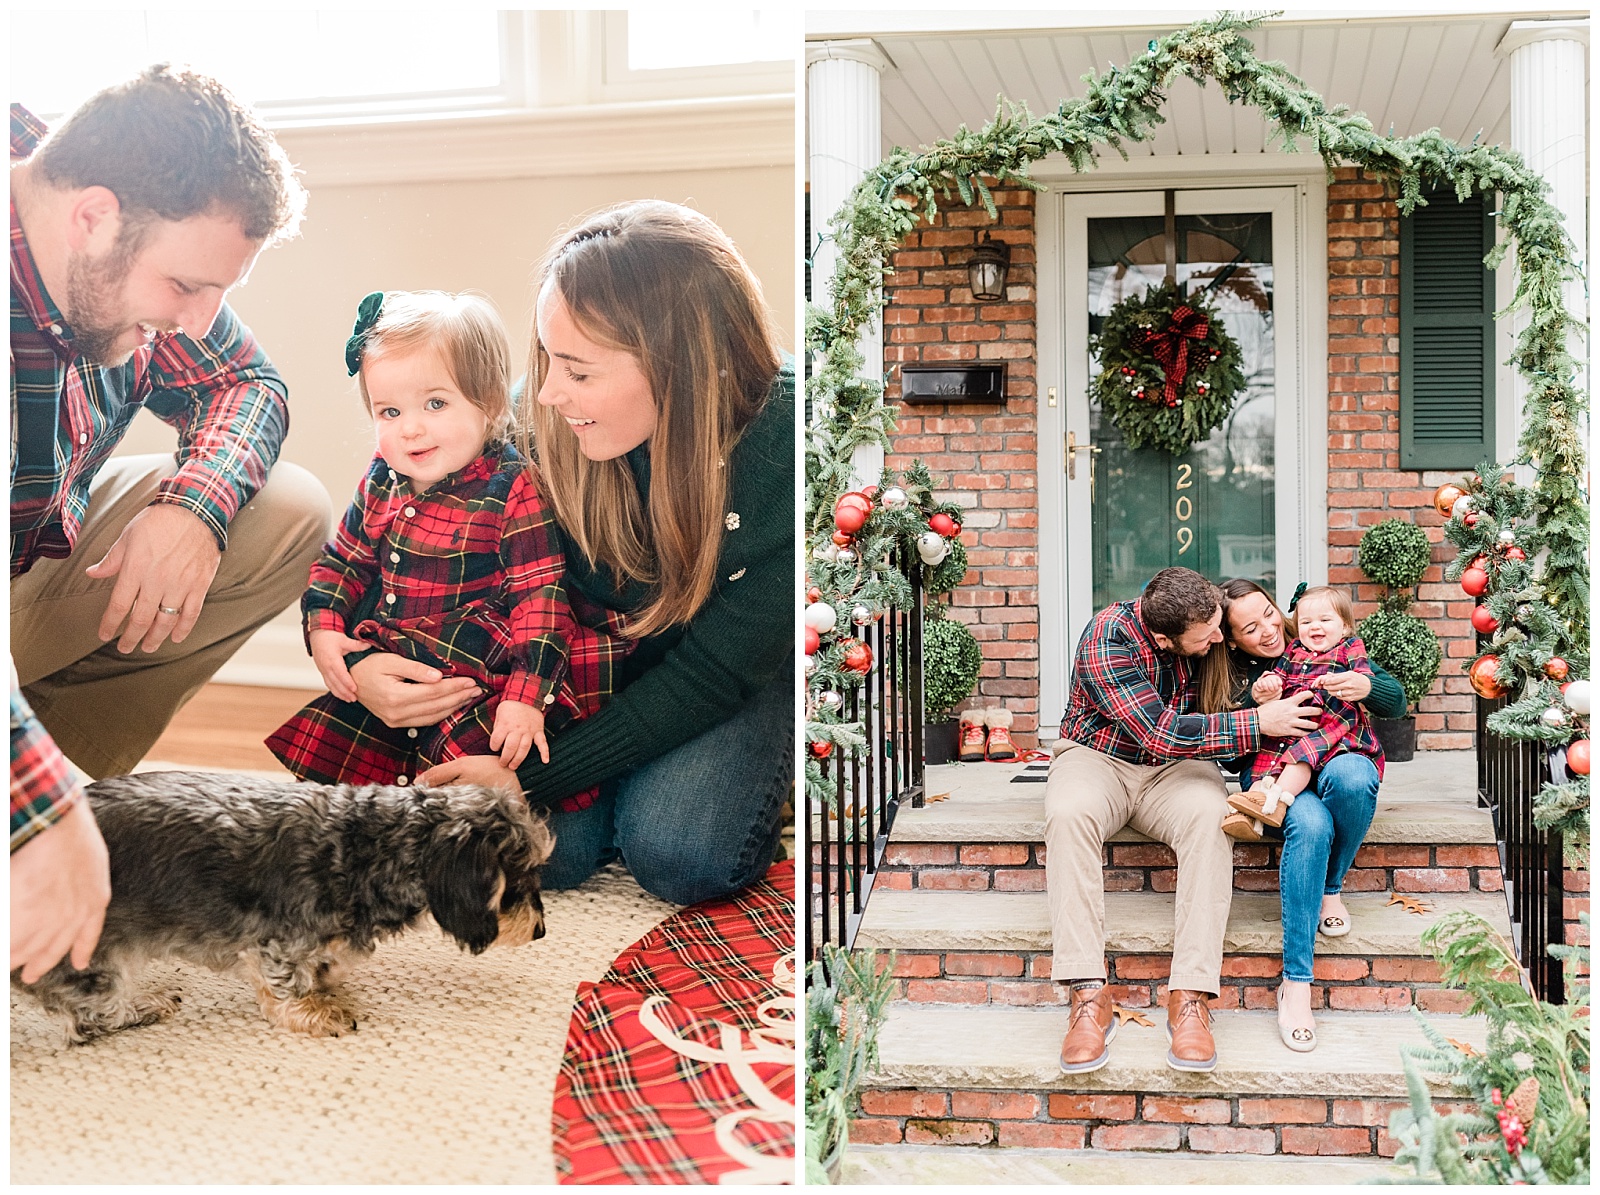 in-home-family-holiday-session-winter-christmas-cozy-photographer-nj-new-jersey-photo_0032.jpg